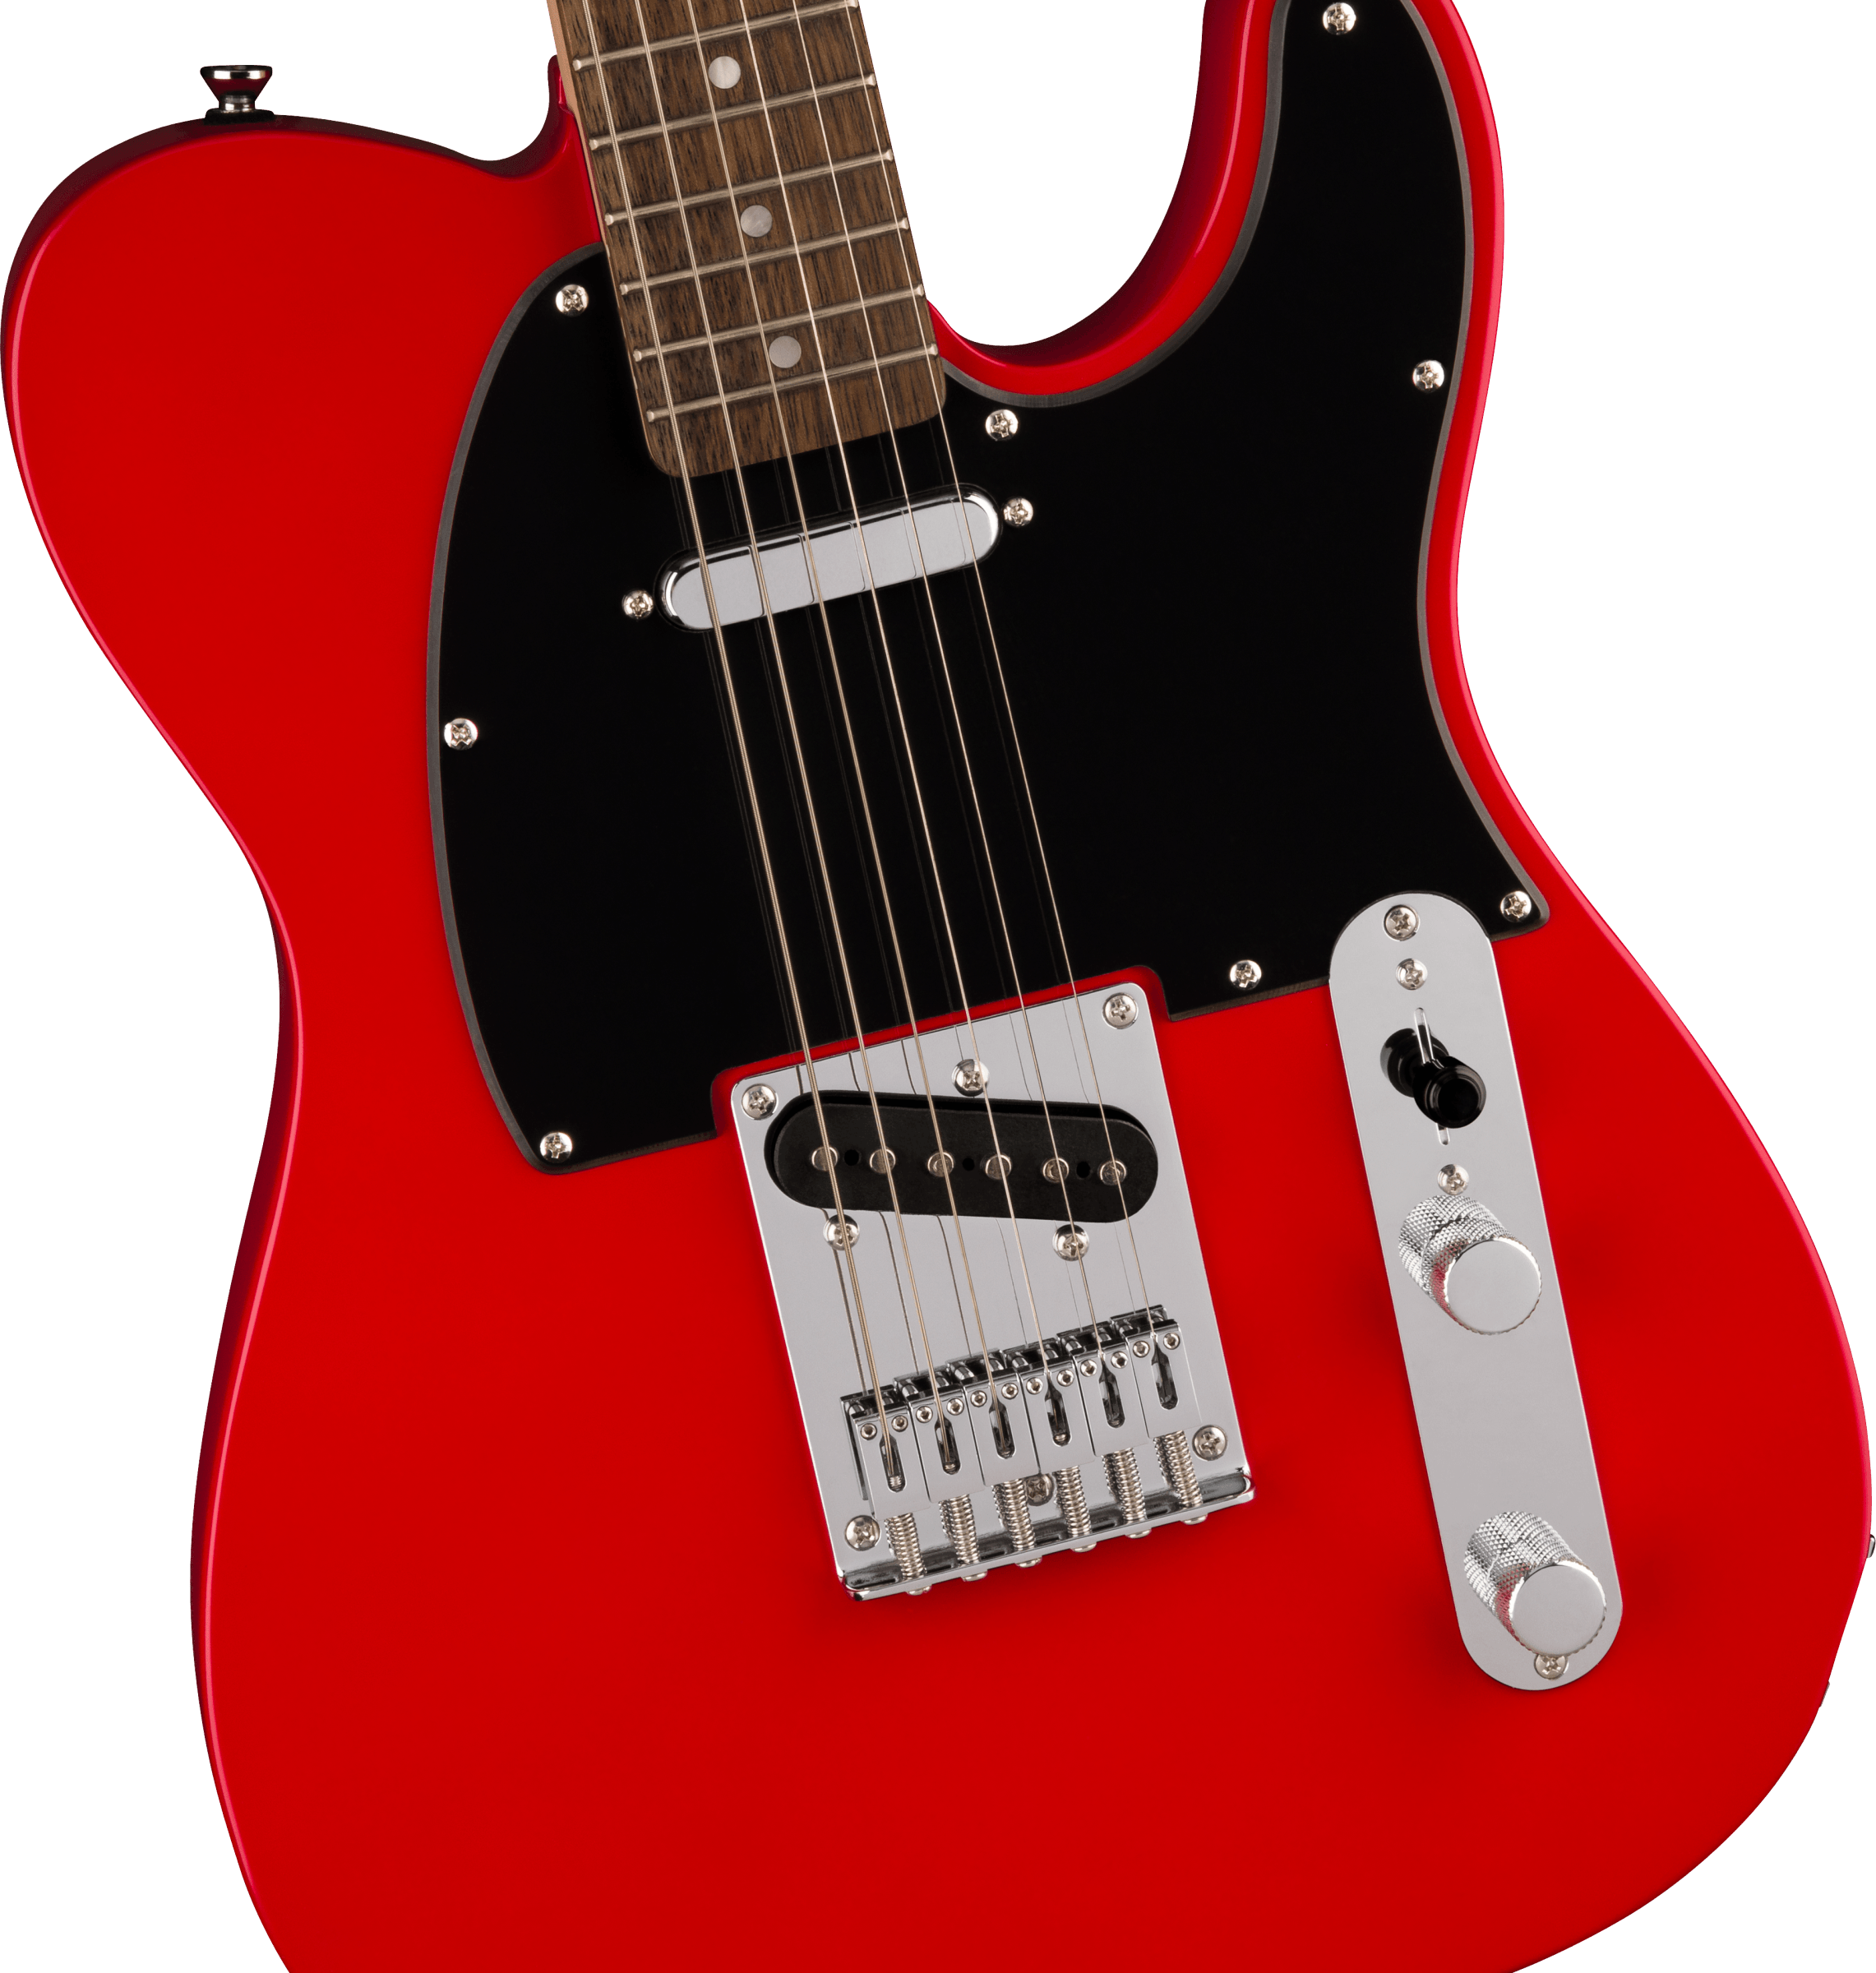 Squier Sonic Telecaster in Torino Red